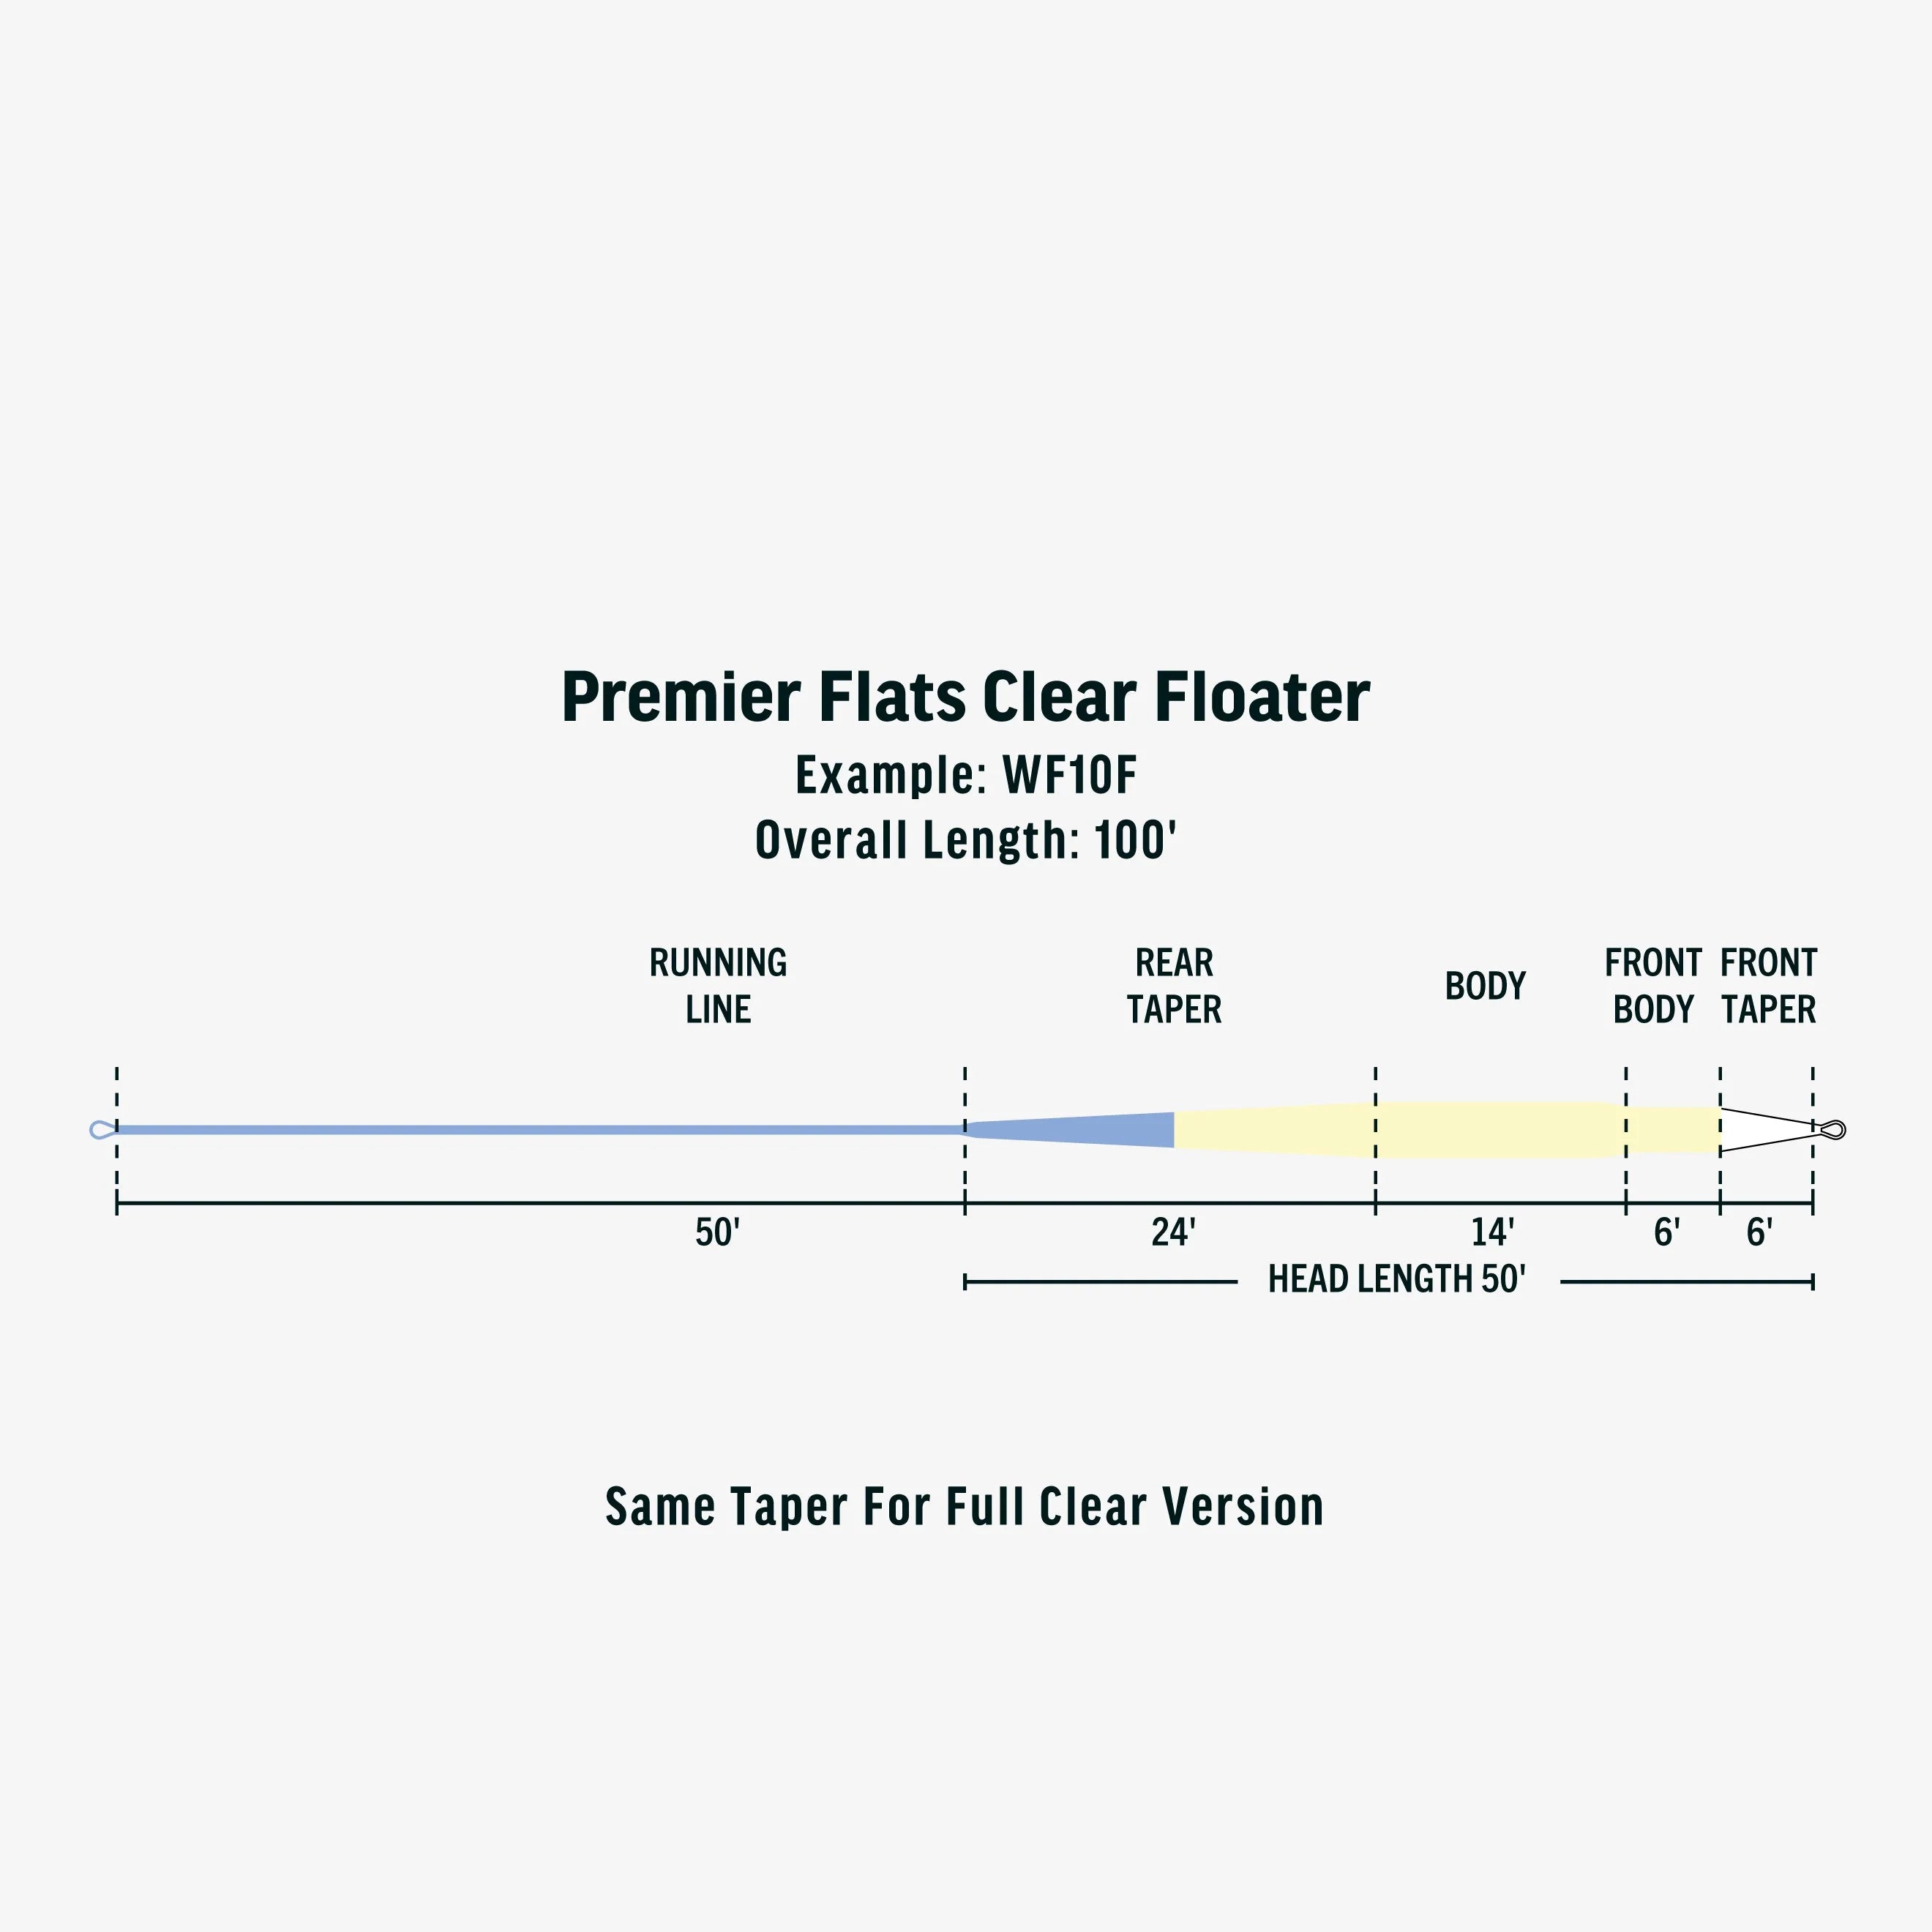 Rio Premier Flats Clear Floater Fly Line